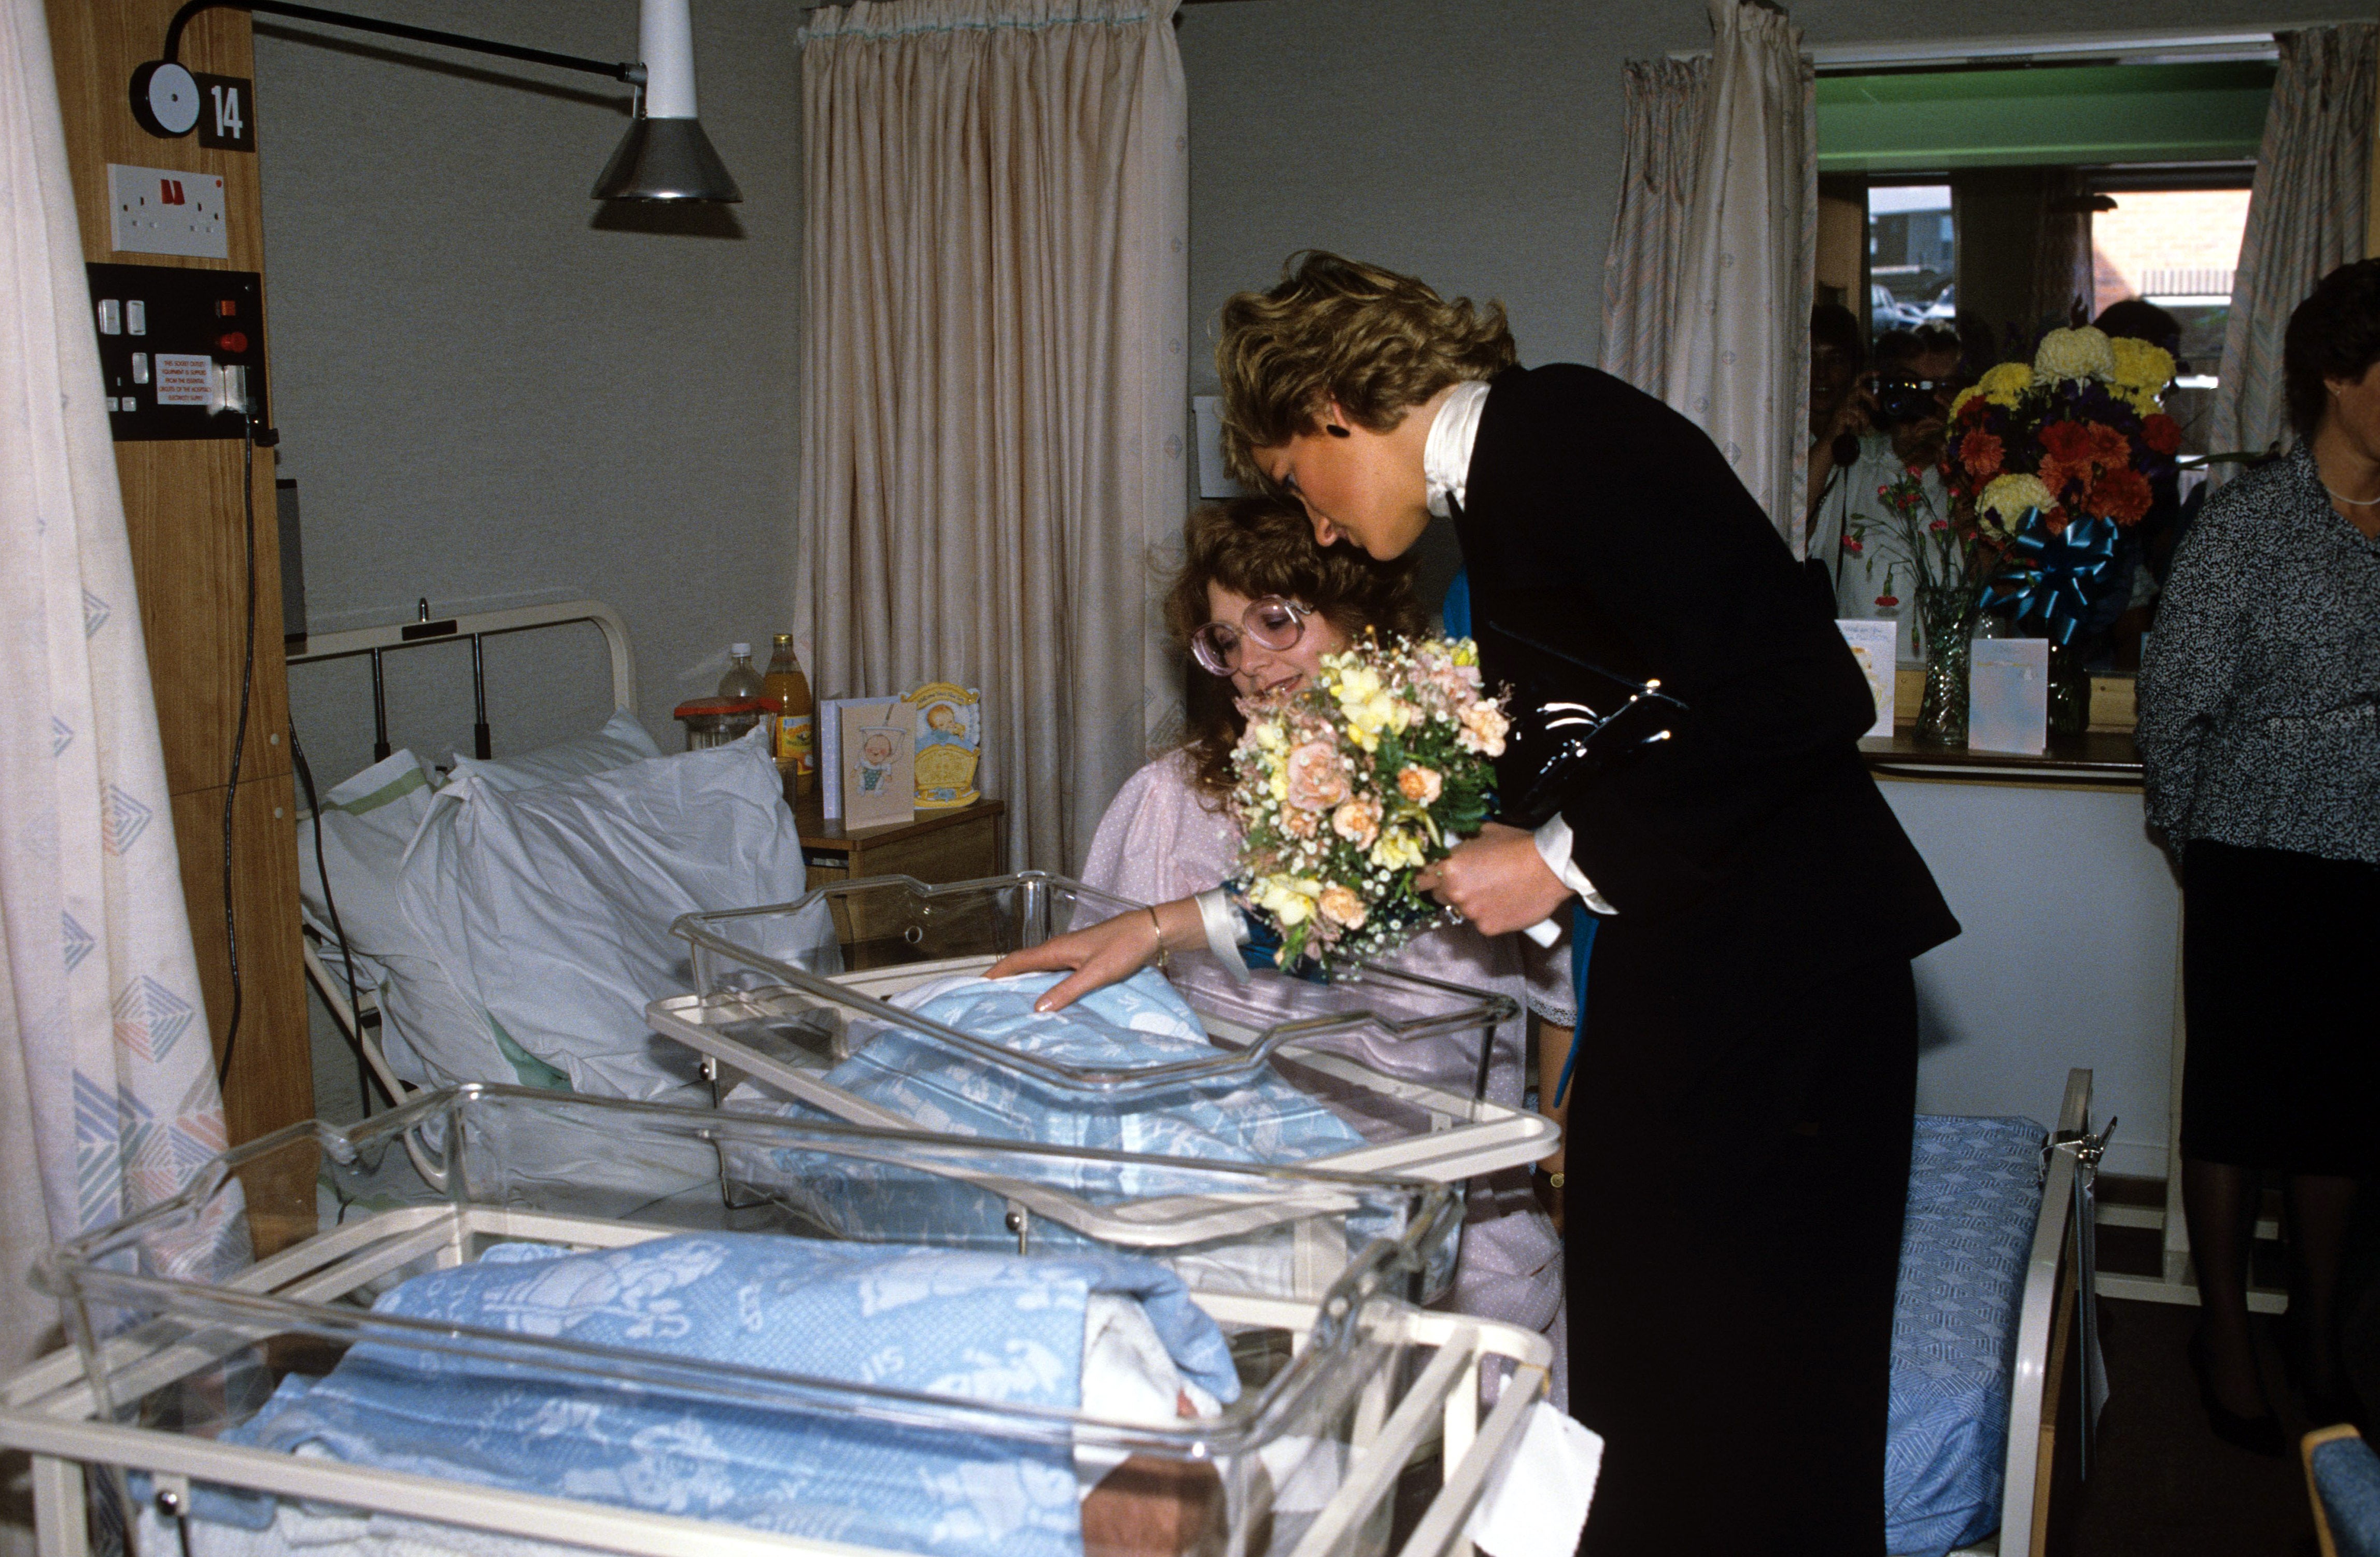 Princess Diana visiting a mother and baby at the Teeside Hospice Care Foundation in Middlesborough, 1988.